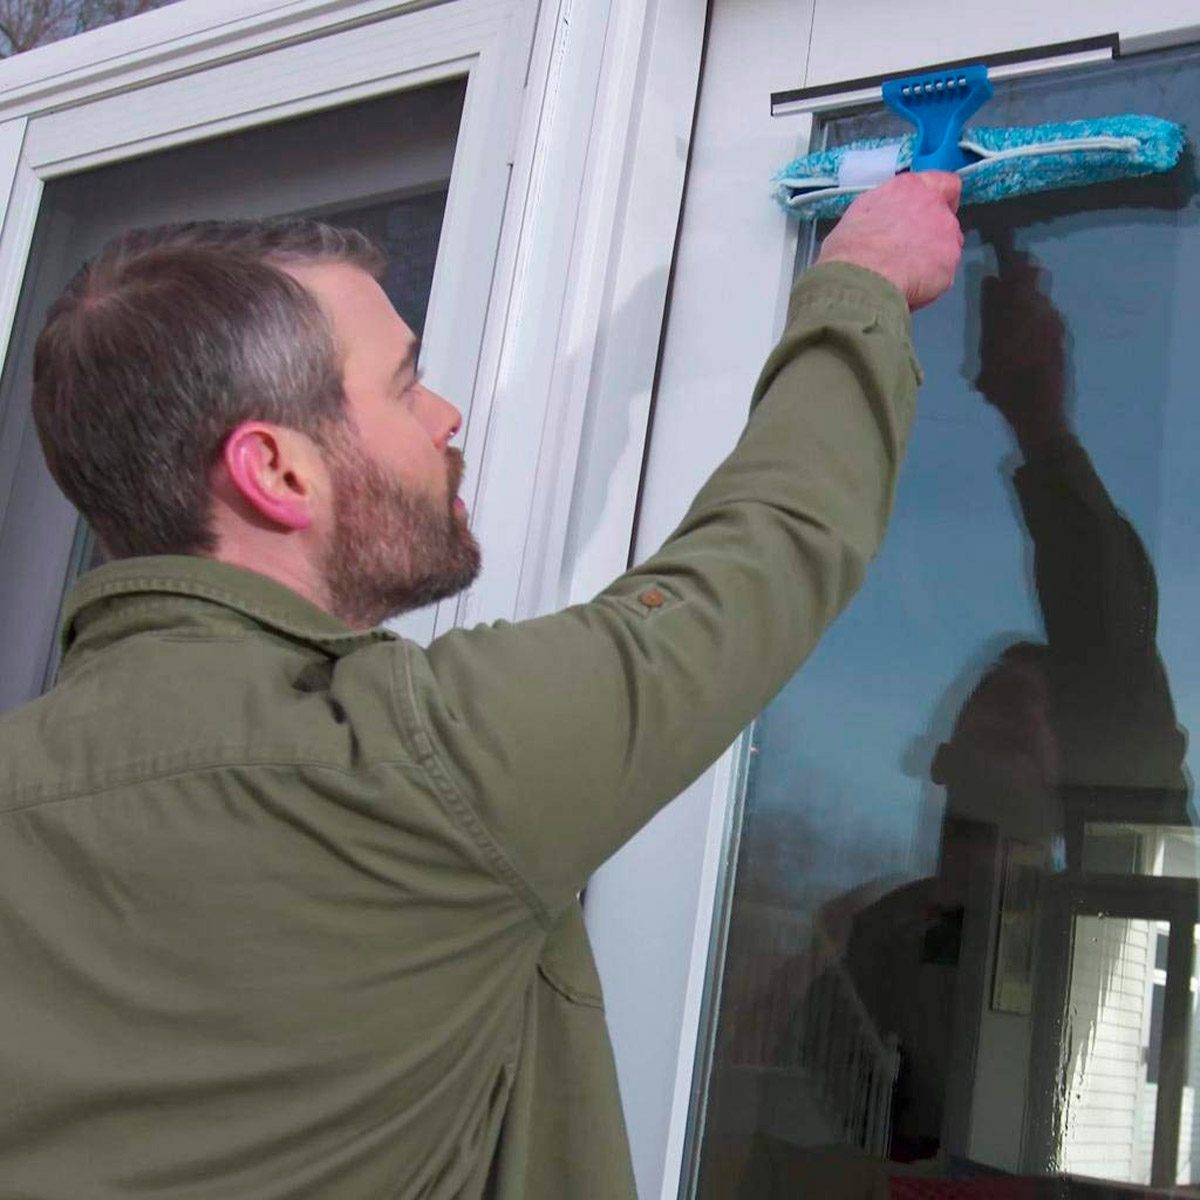 7 Best Magnetic Window Cleaners 2019 